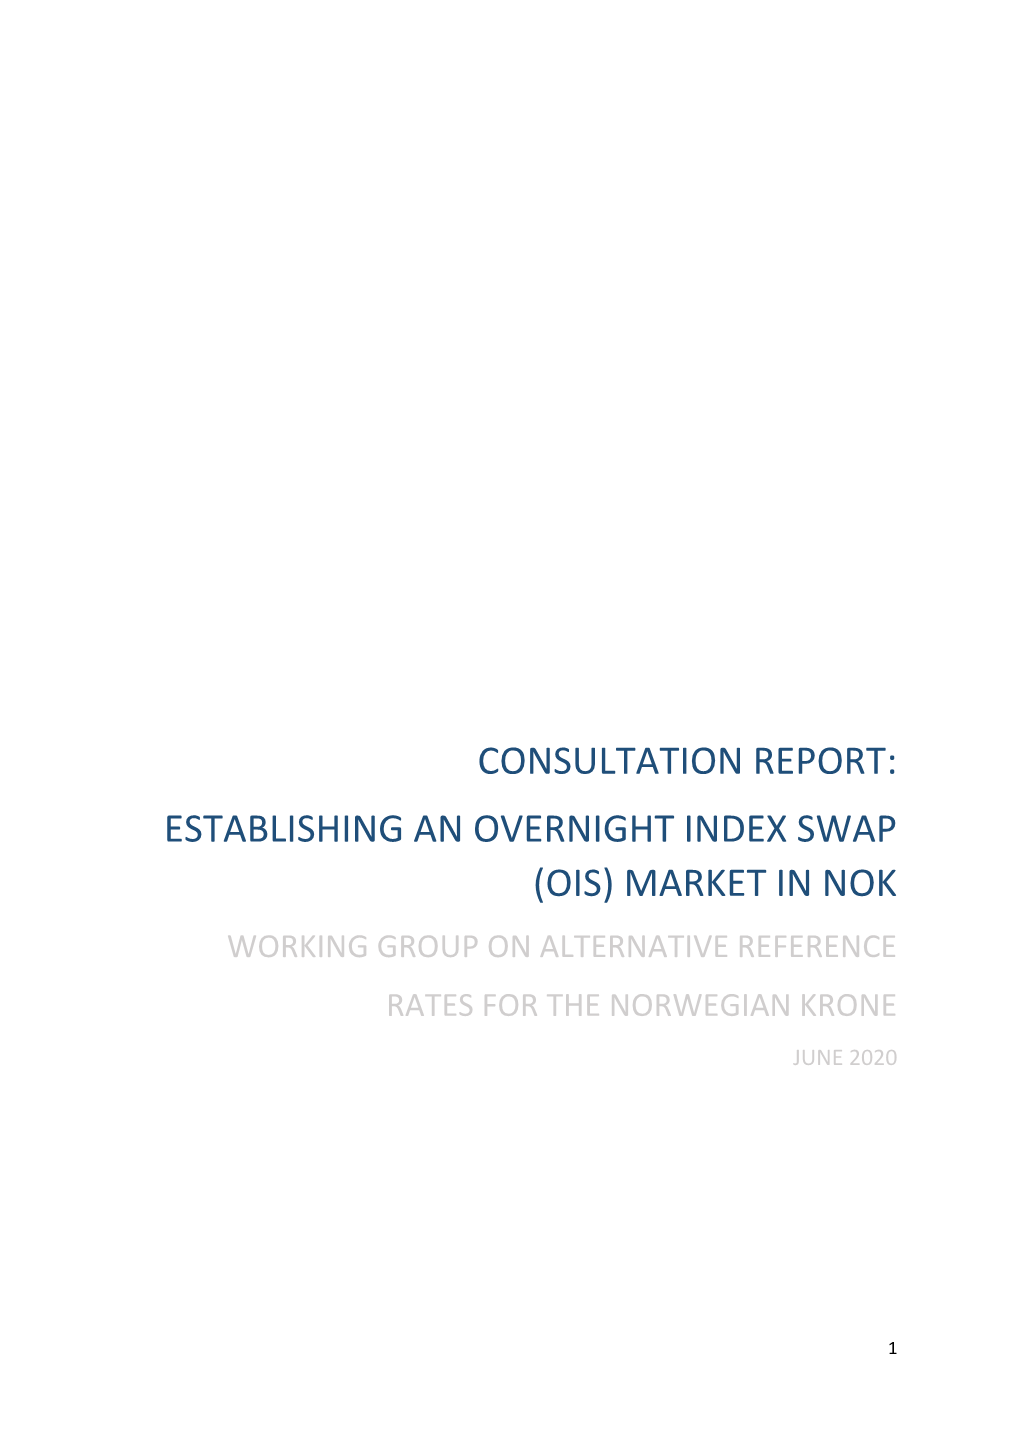 Establishing an Overnight Index Swap (Ois) Market in Nok Working Group on Alternative Reference Rates for the Norwegian Krone June 2020